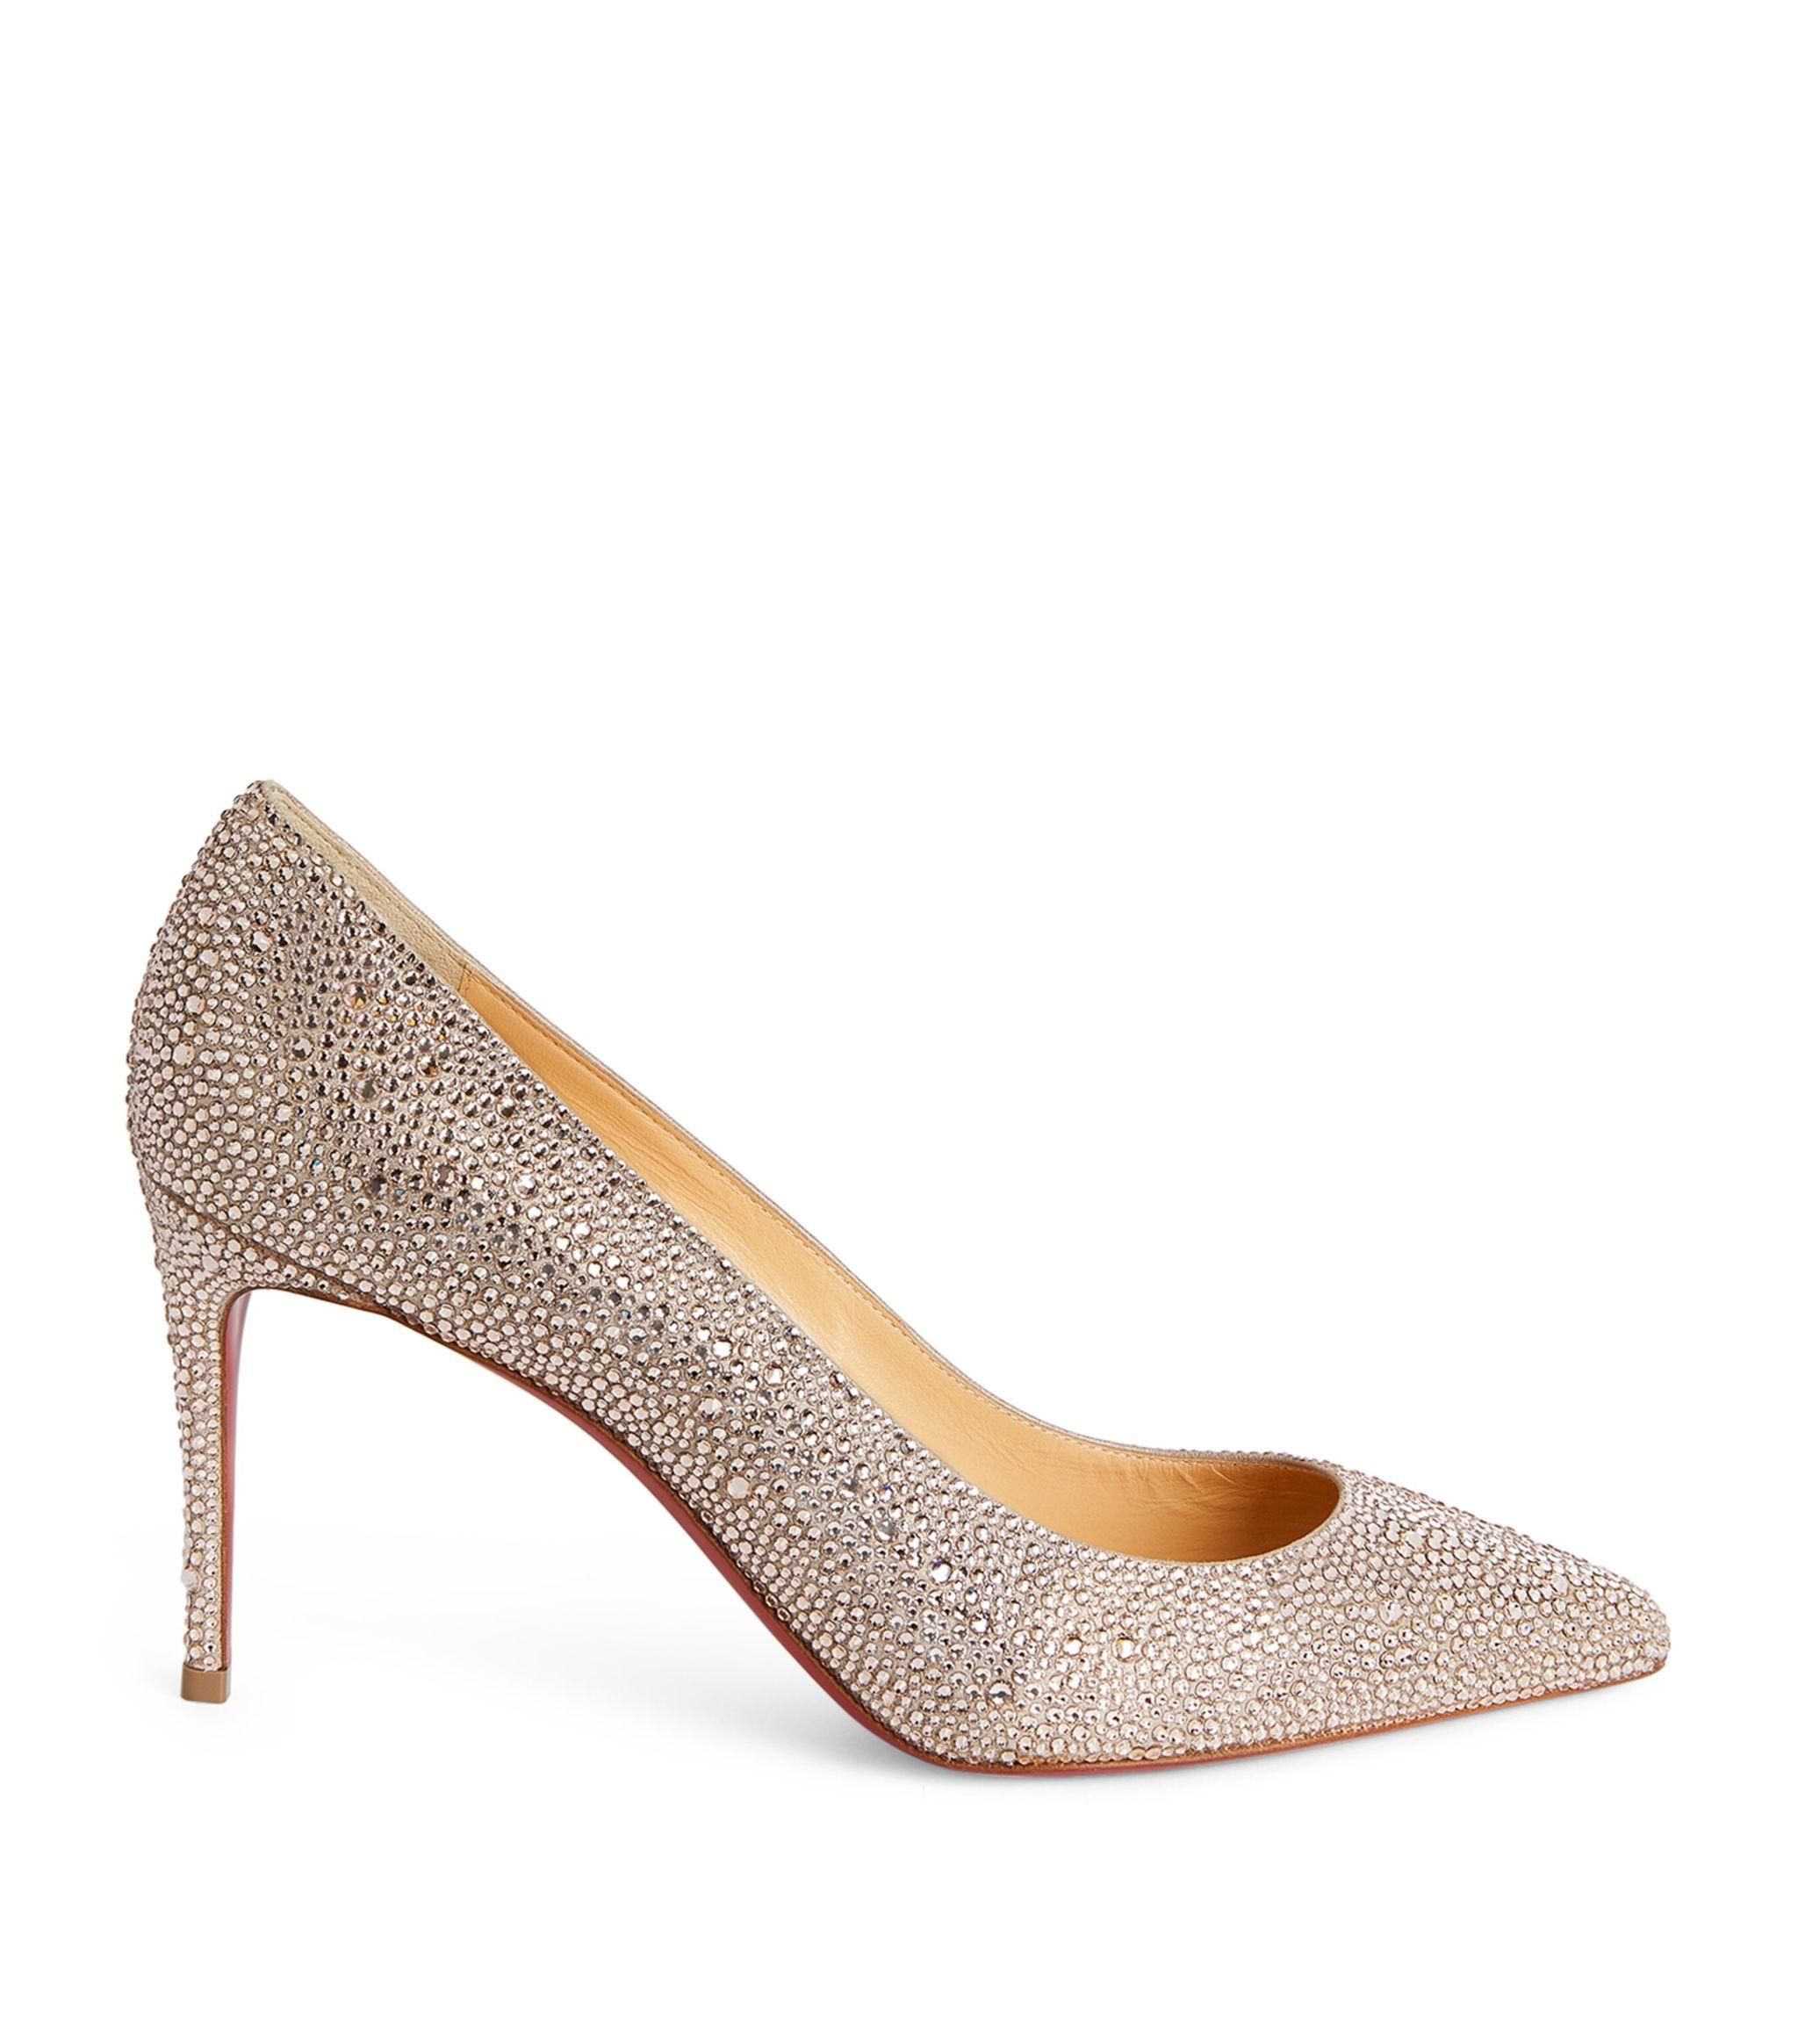 Christian Louboutin Kate Embellished Leather Strass Pumps 85 in Metallic |  Lyst